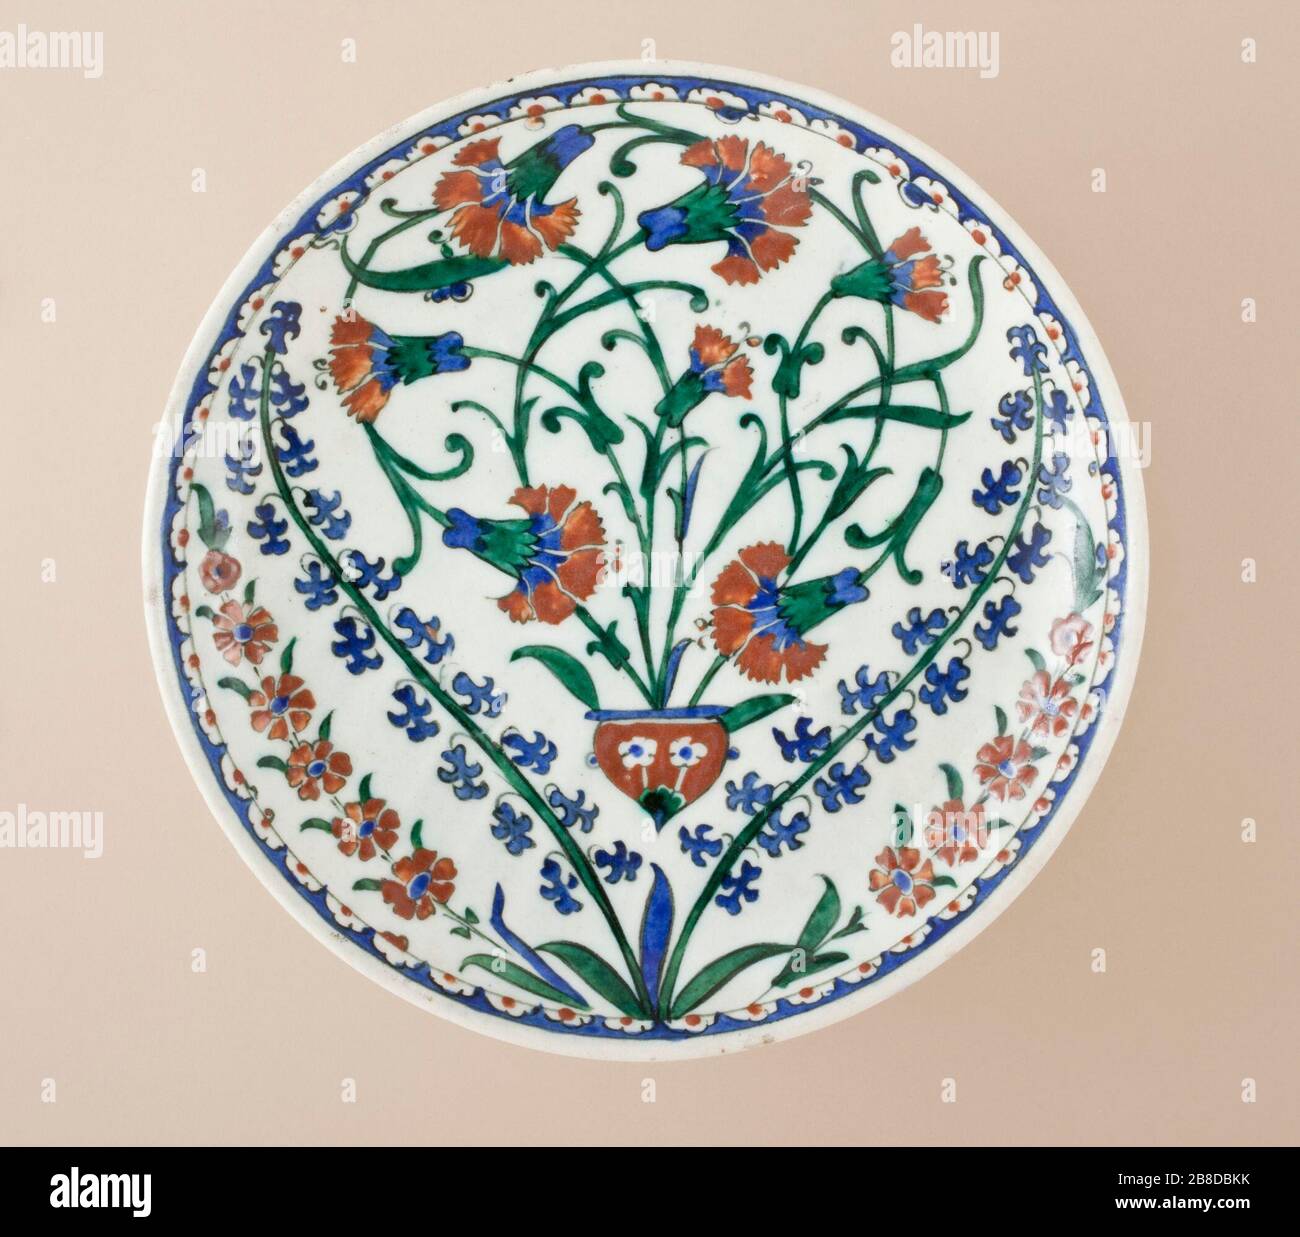 'Dish; English:  Turkey, Iznik, 1560-1585 Furnishings; Serviceware Fritware, underglaze-painted Height:  1 15/16 in. (5 cm); Diameter:  11 in. (28 cm) Purchased with funds provided by Camilla Chandler Frost (M.2006.130) Islamic Art; between 1560 and 1585 date QS:P571,+1550-00-00T00:00:00Z/7,P1319,+1560-00-00T00:00:00Z/9,P1326,+1585-00-00T00:00:00Z/9; ' Stock Photo